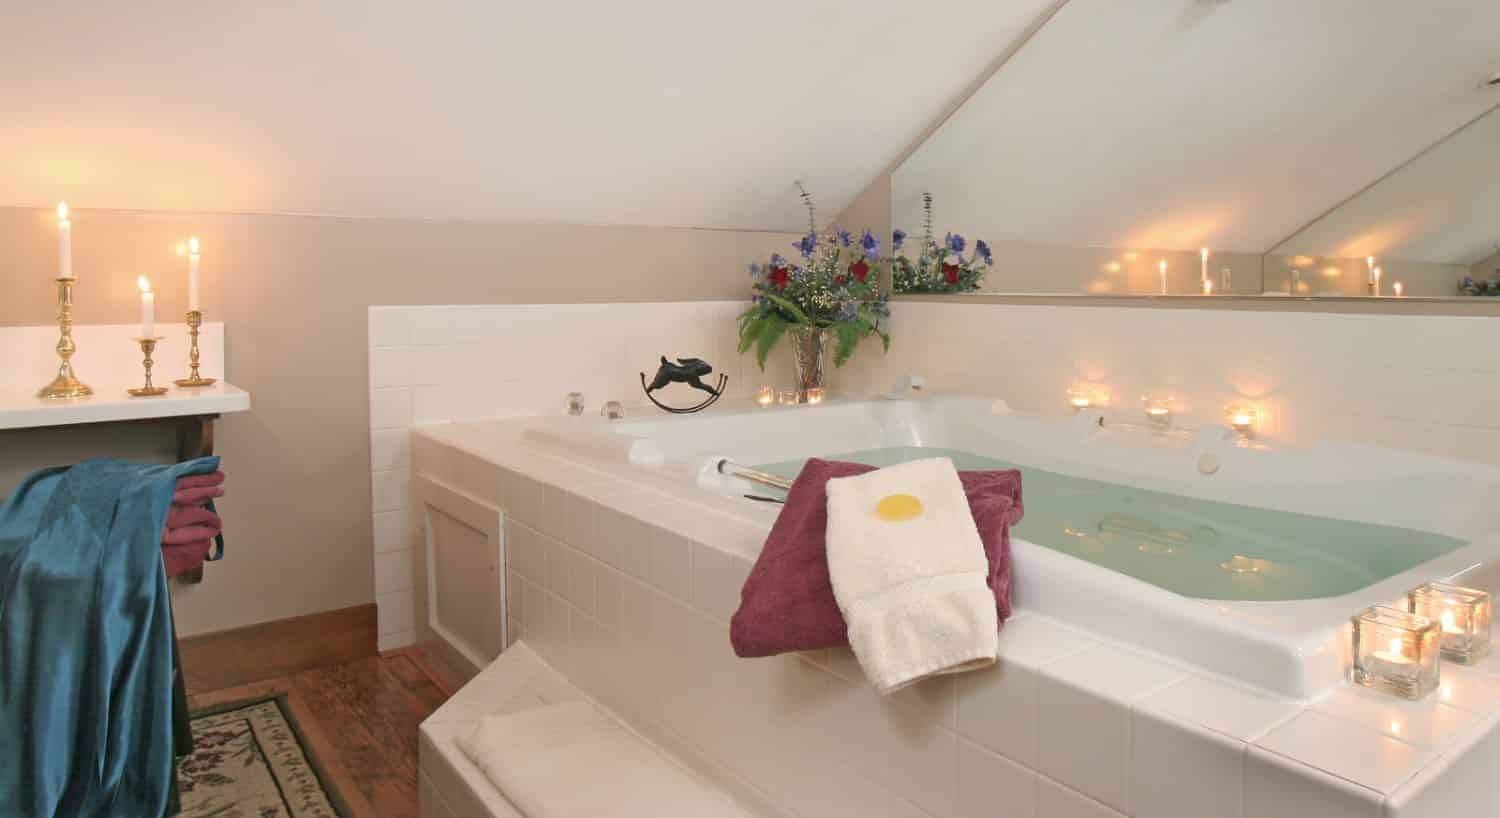 Large whirlpool tub surrounded by white tiles, light cream walls, and lighted candles